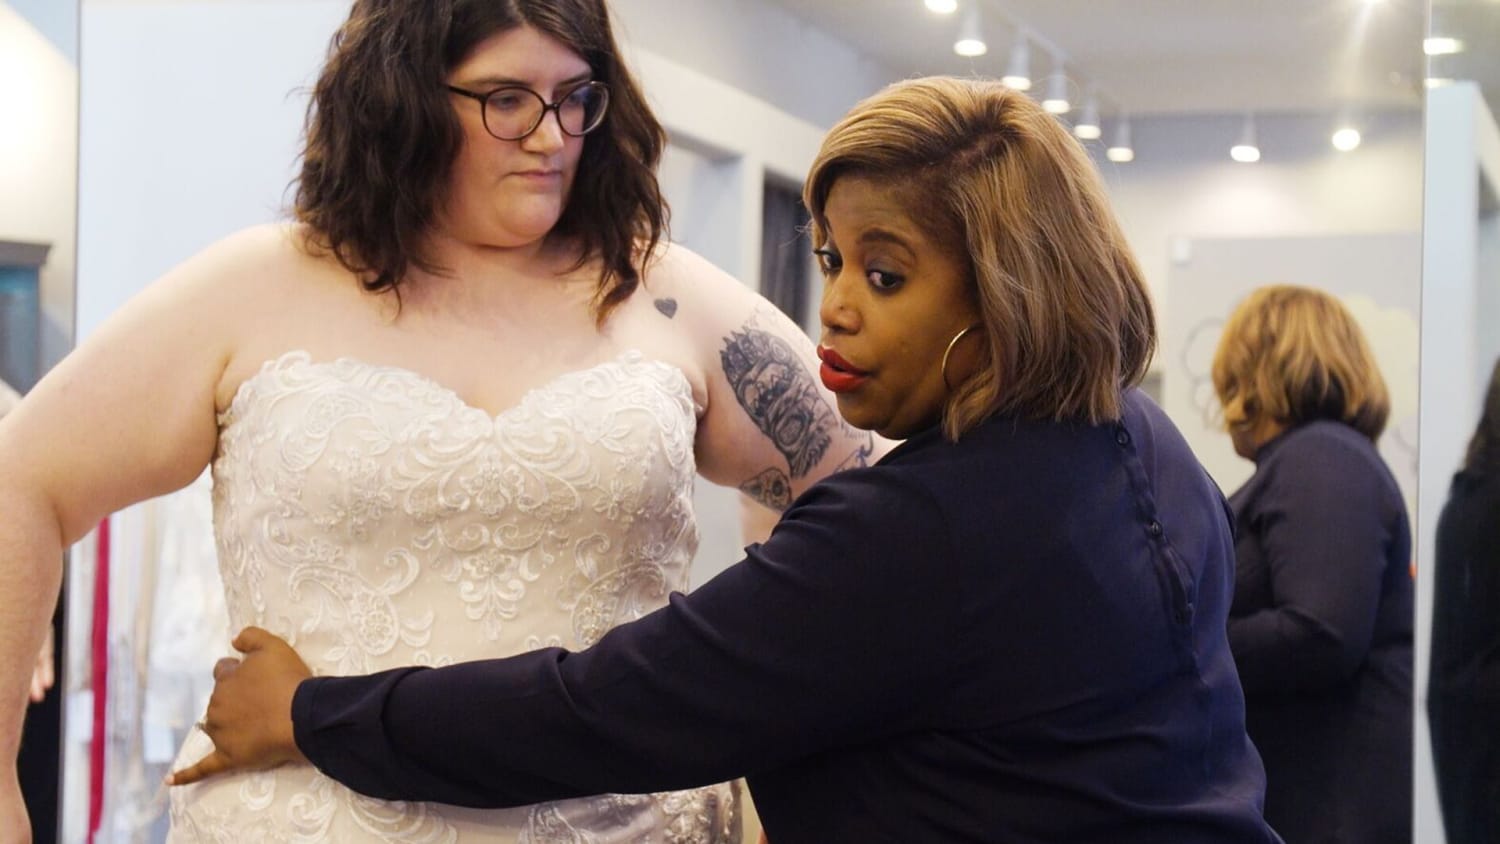 Wedding dress shop offers plus-size women a place of own